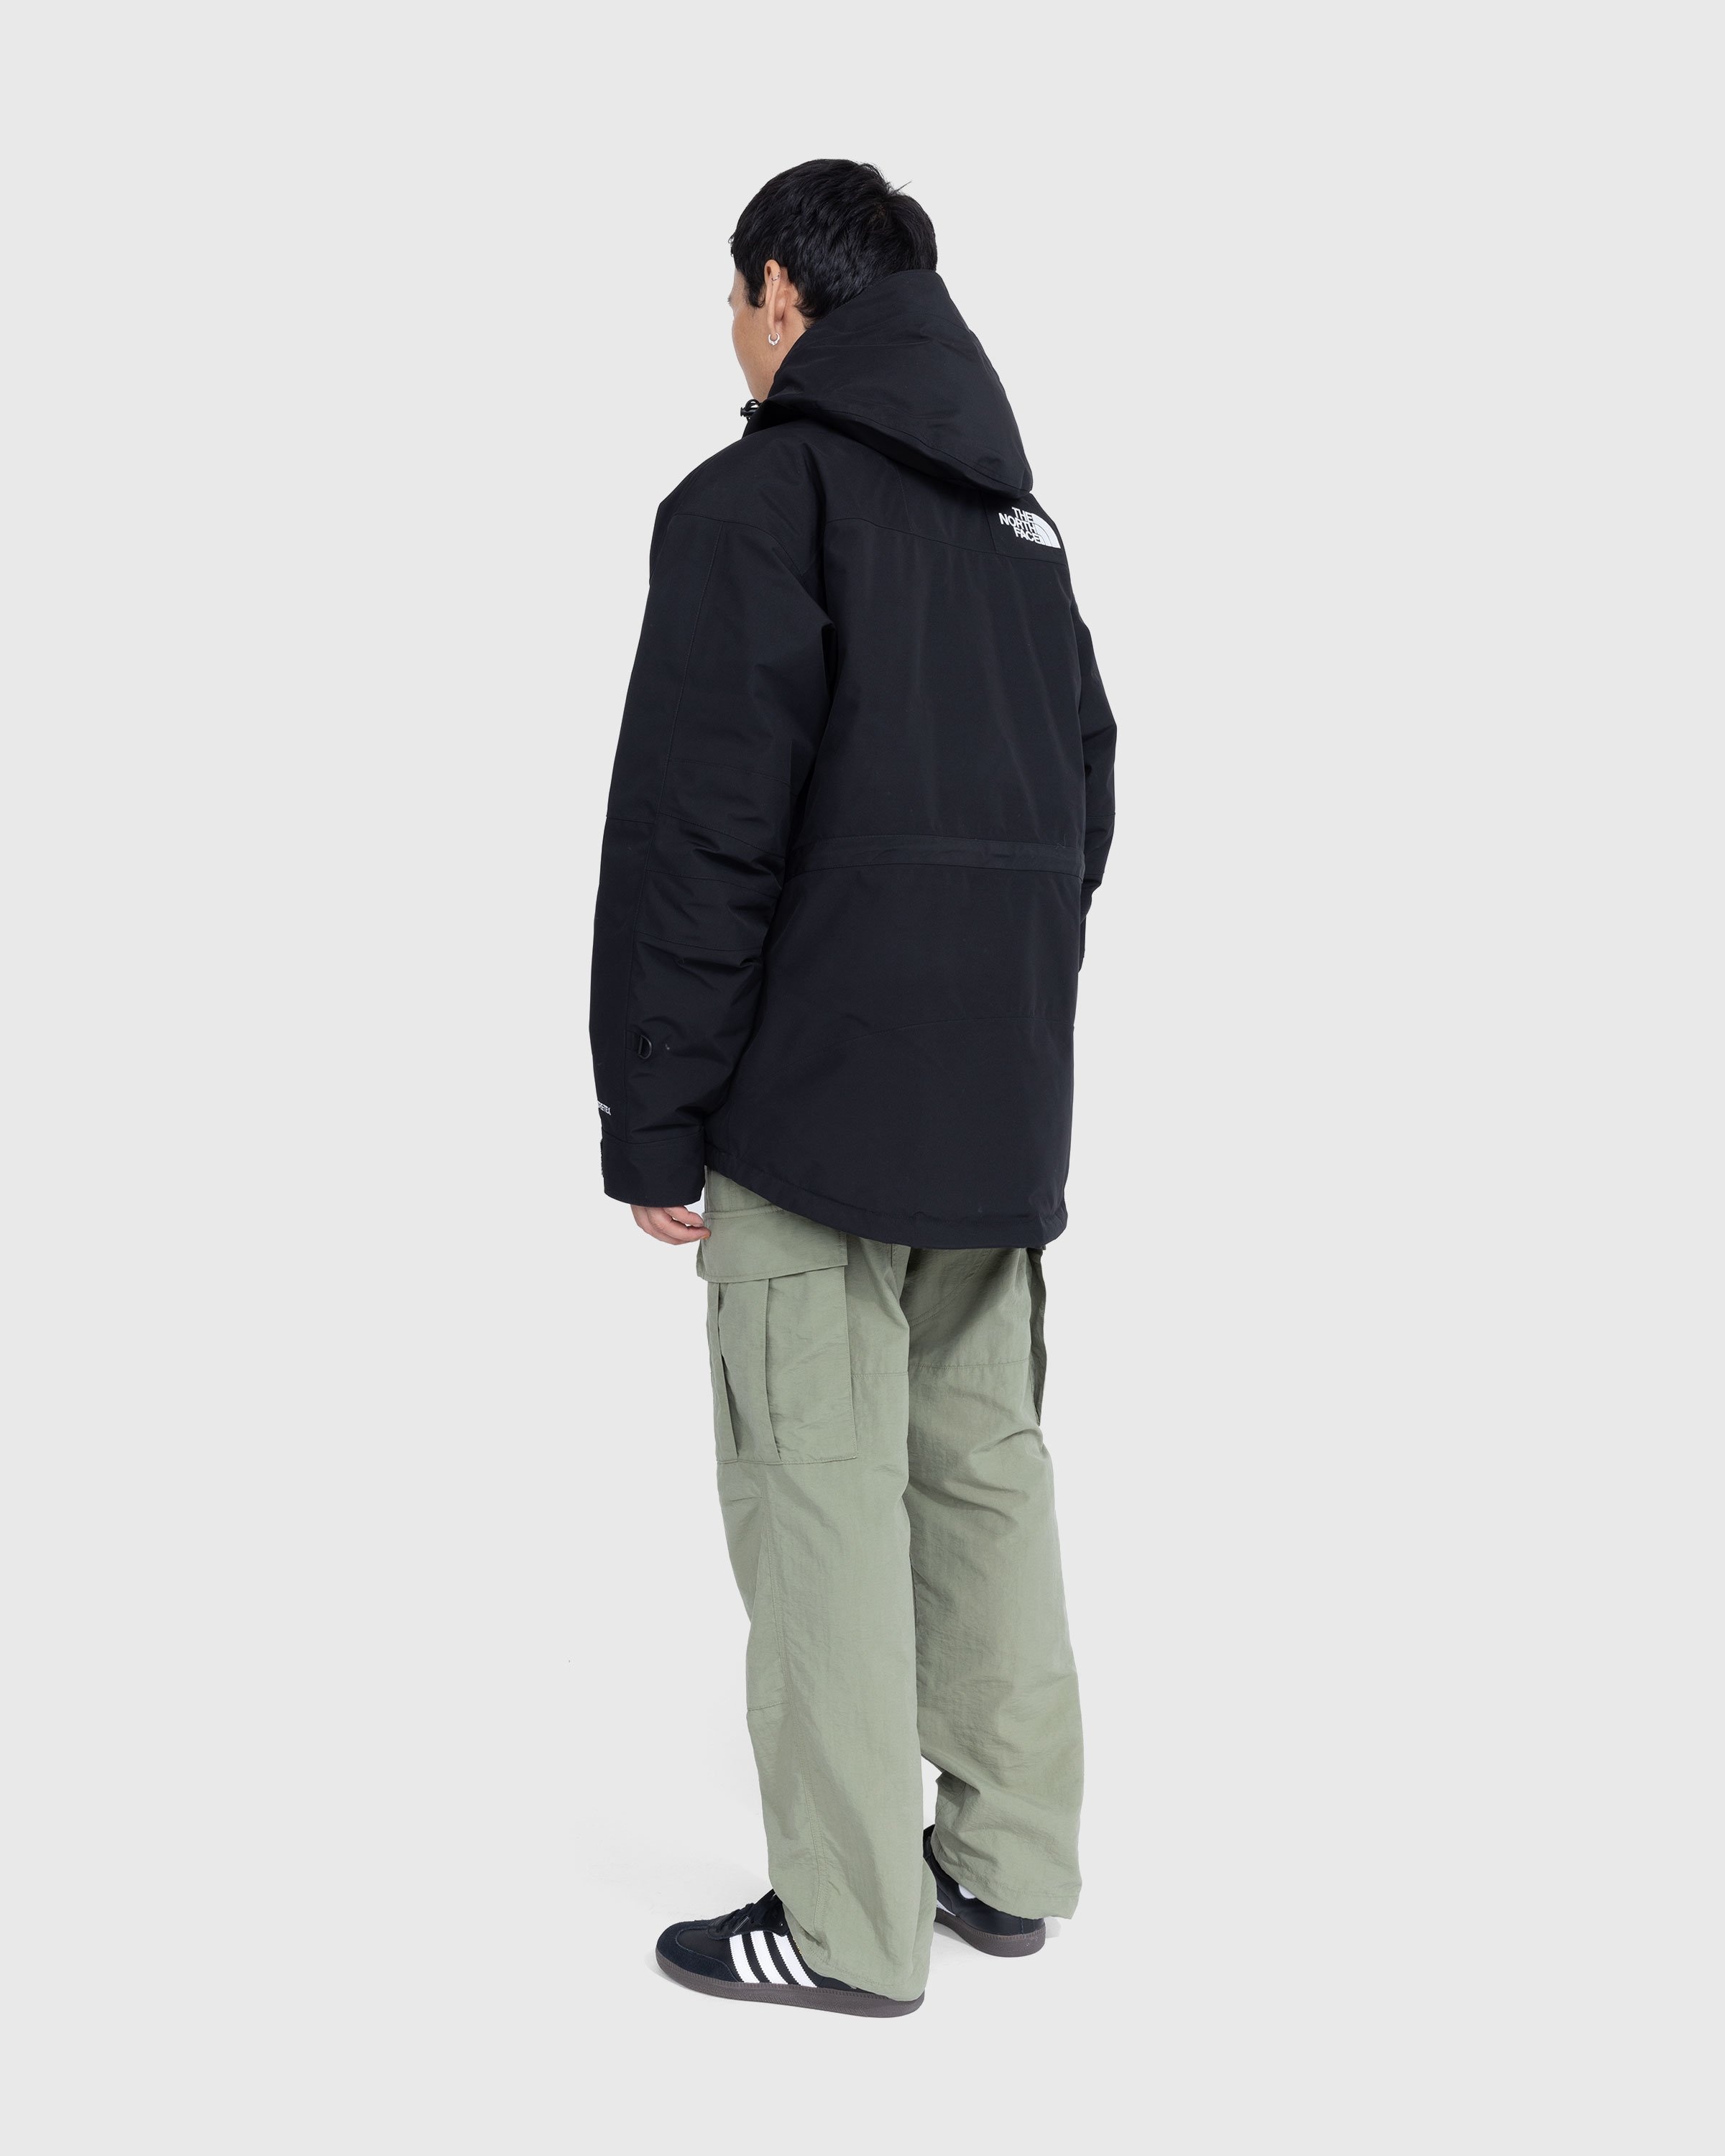 The North Face – GORE-TEX Mountain Guide Insulated Jacket Black - Outerwear - Black - Image 3